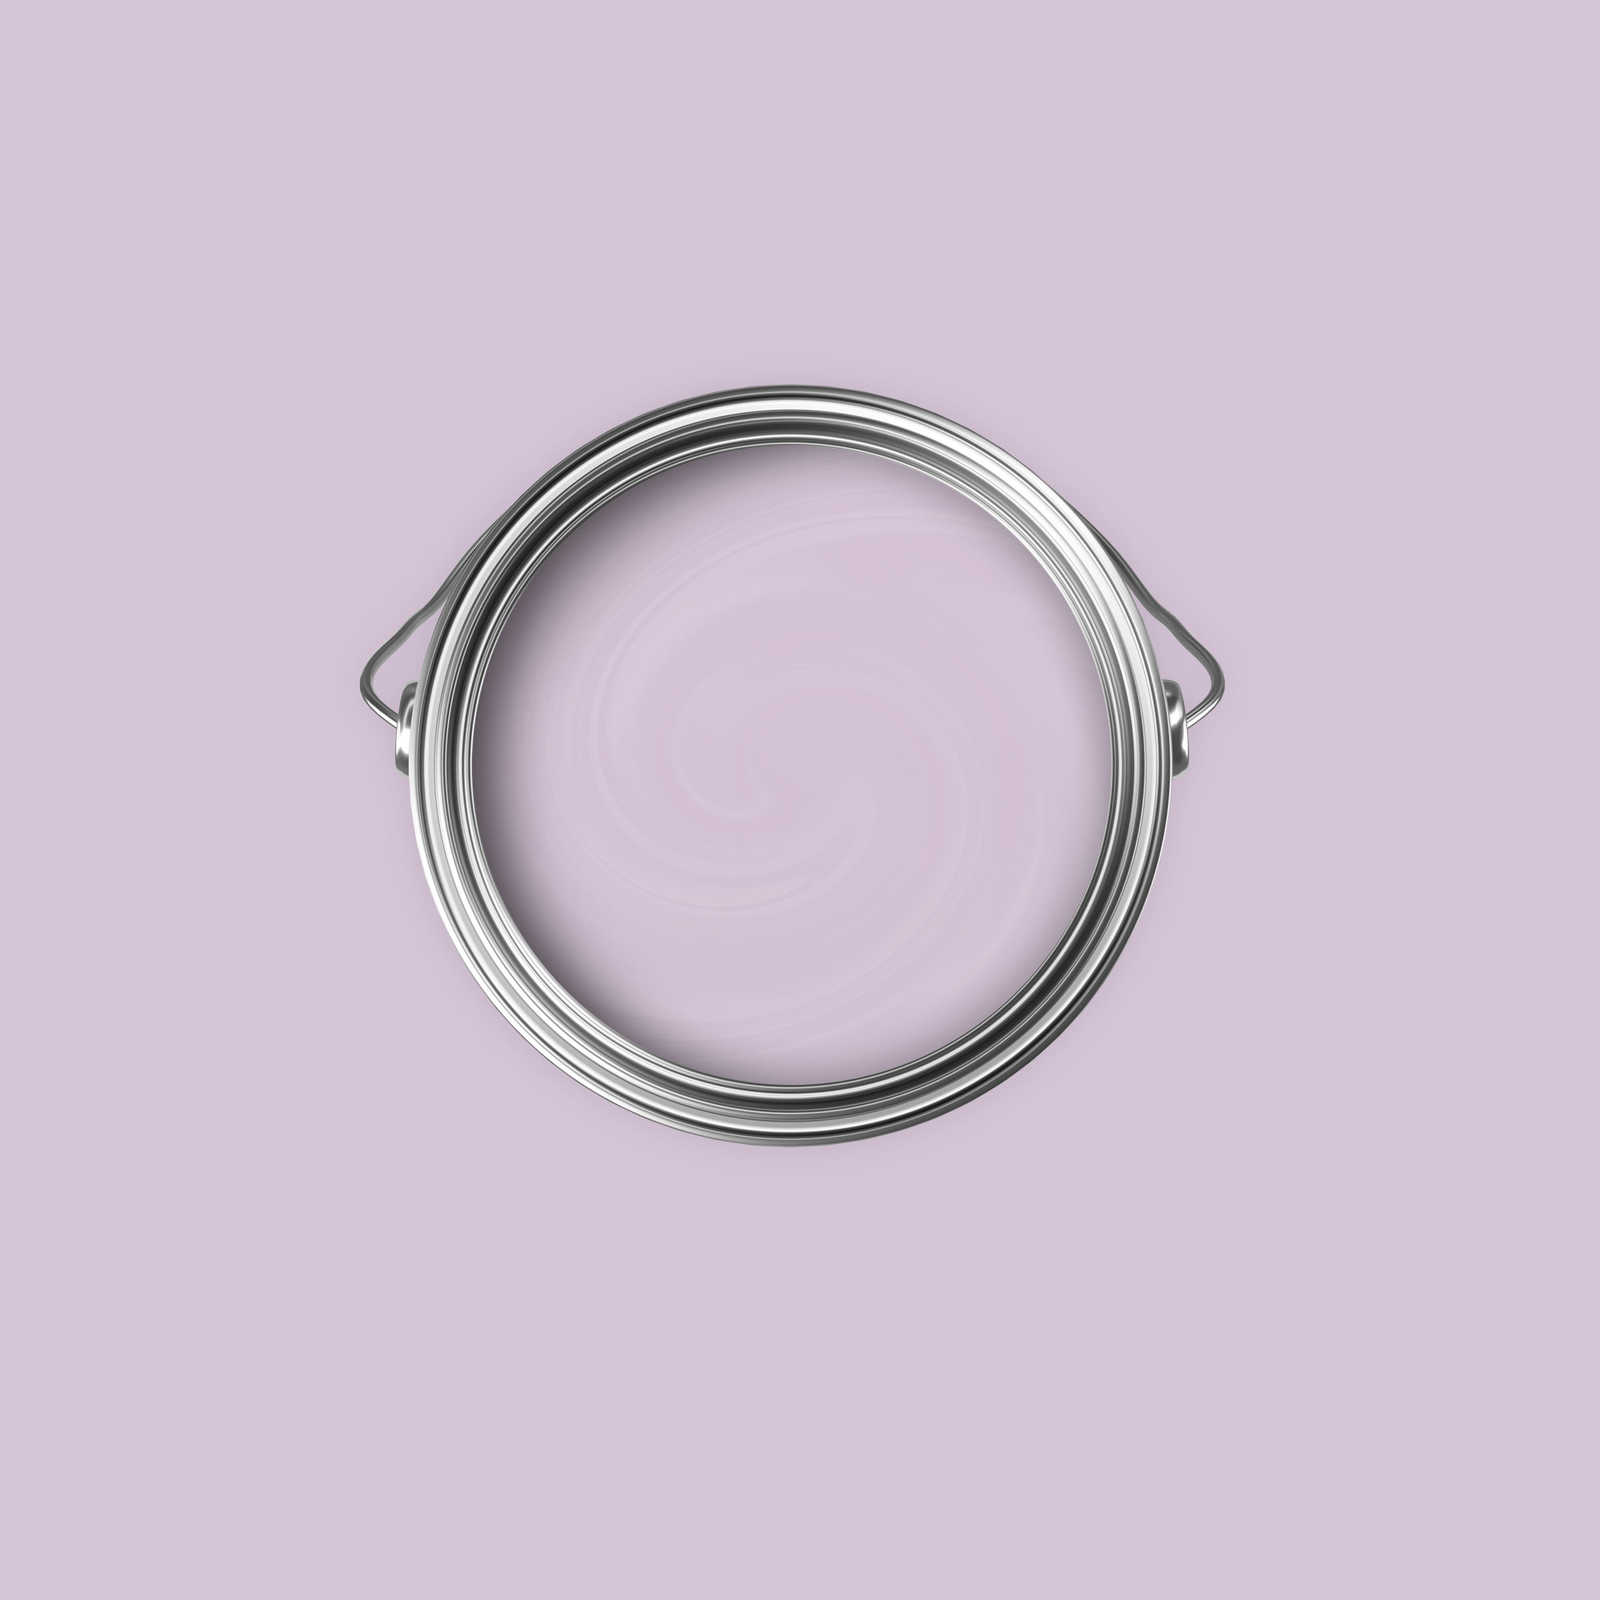             Premium Wall Paint delicate lilac »Beautiful Berry« NW207 – 2.5 litre
        